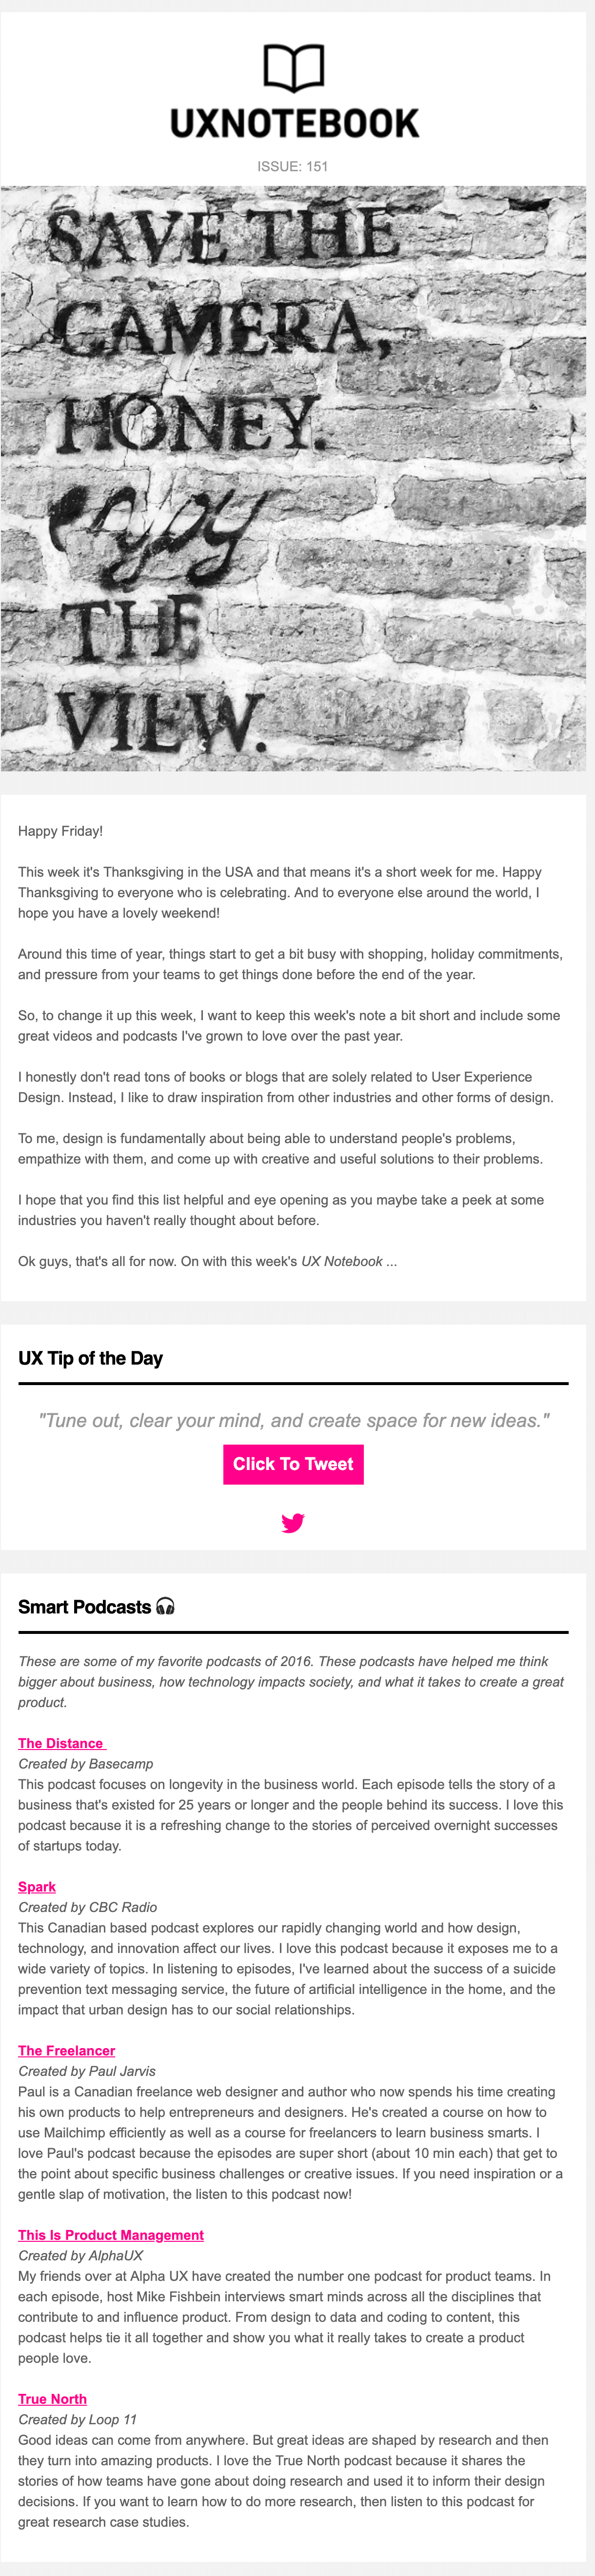 UX Notebook sends one of the best emails from blogs.